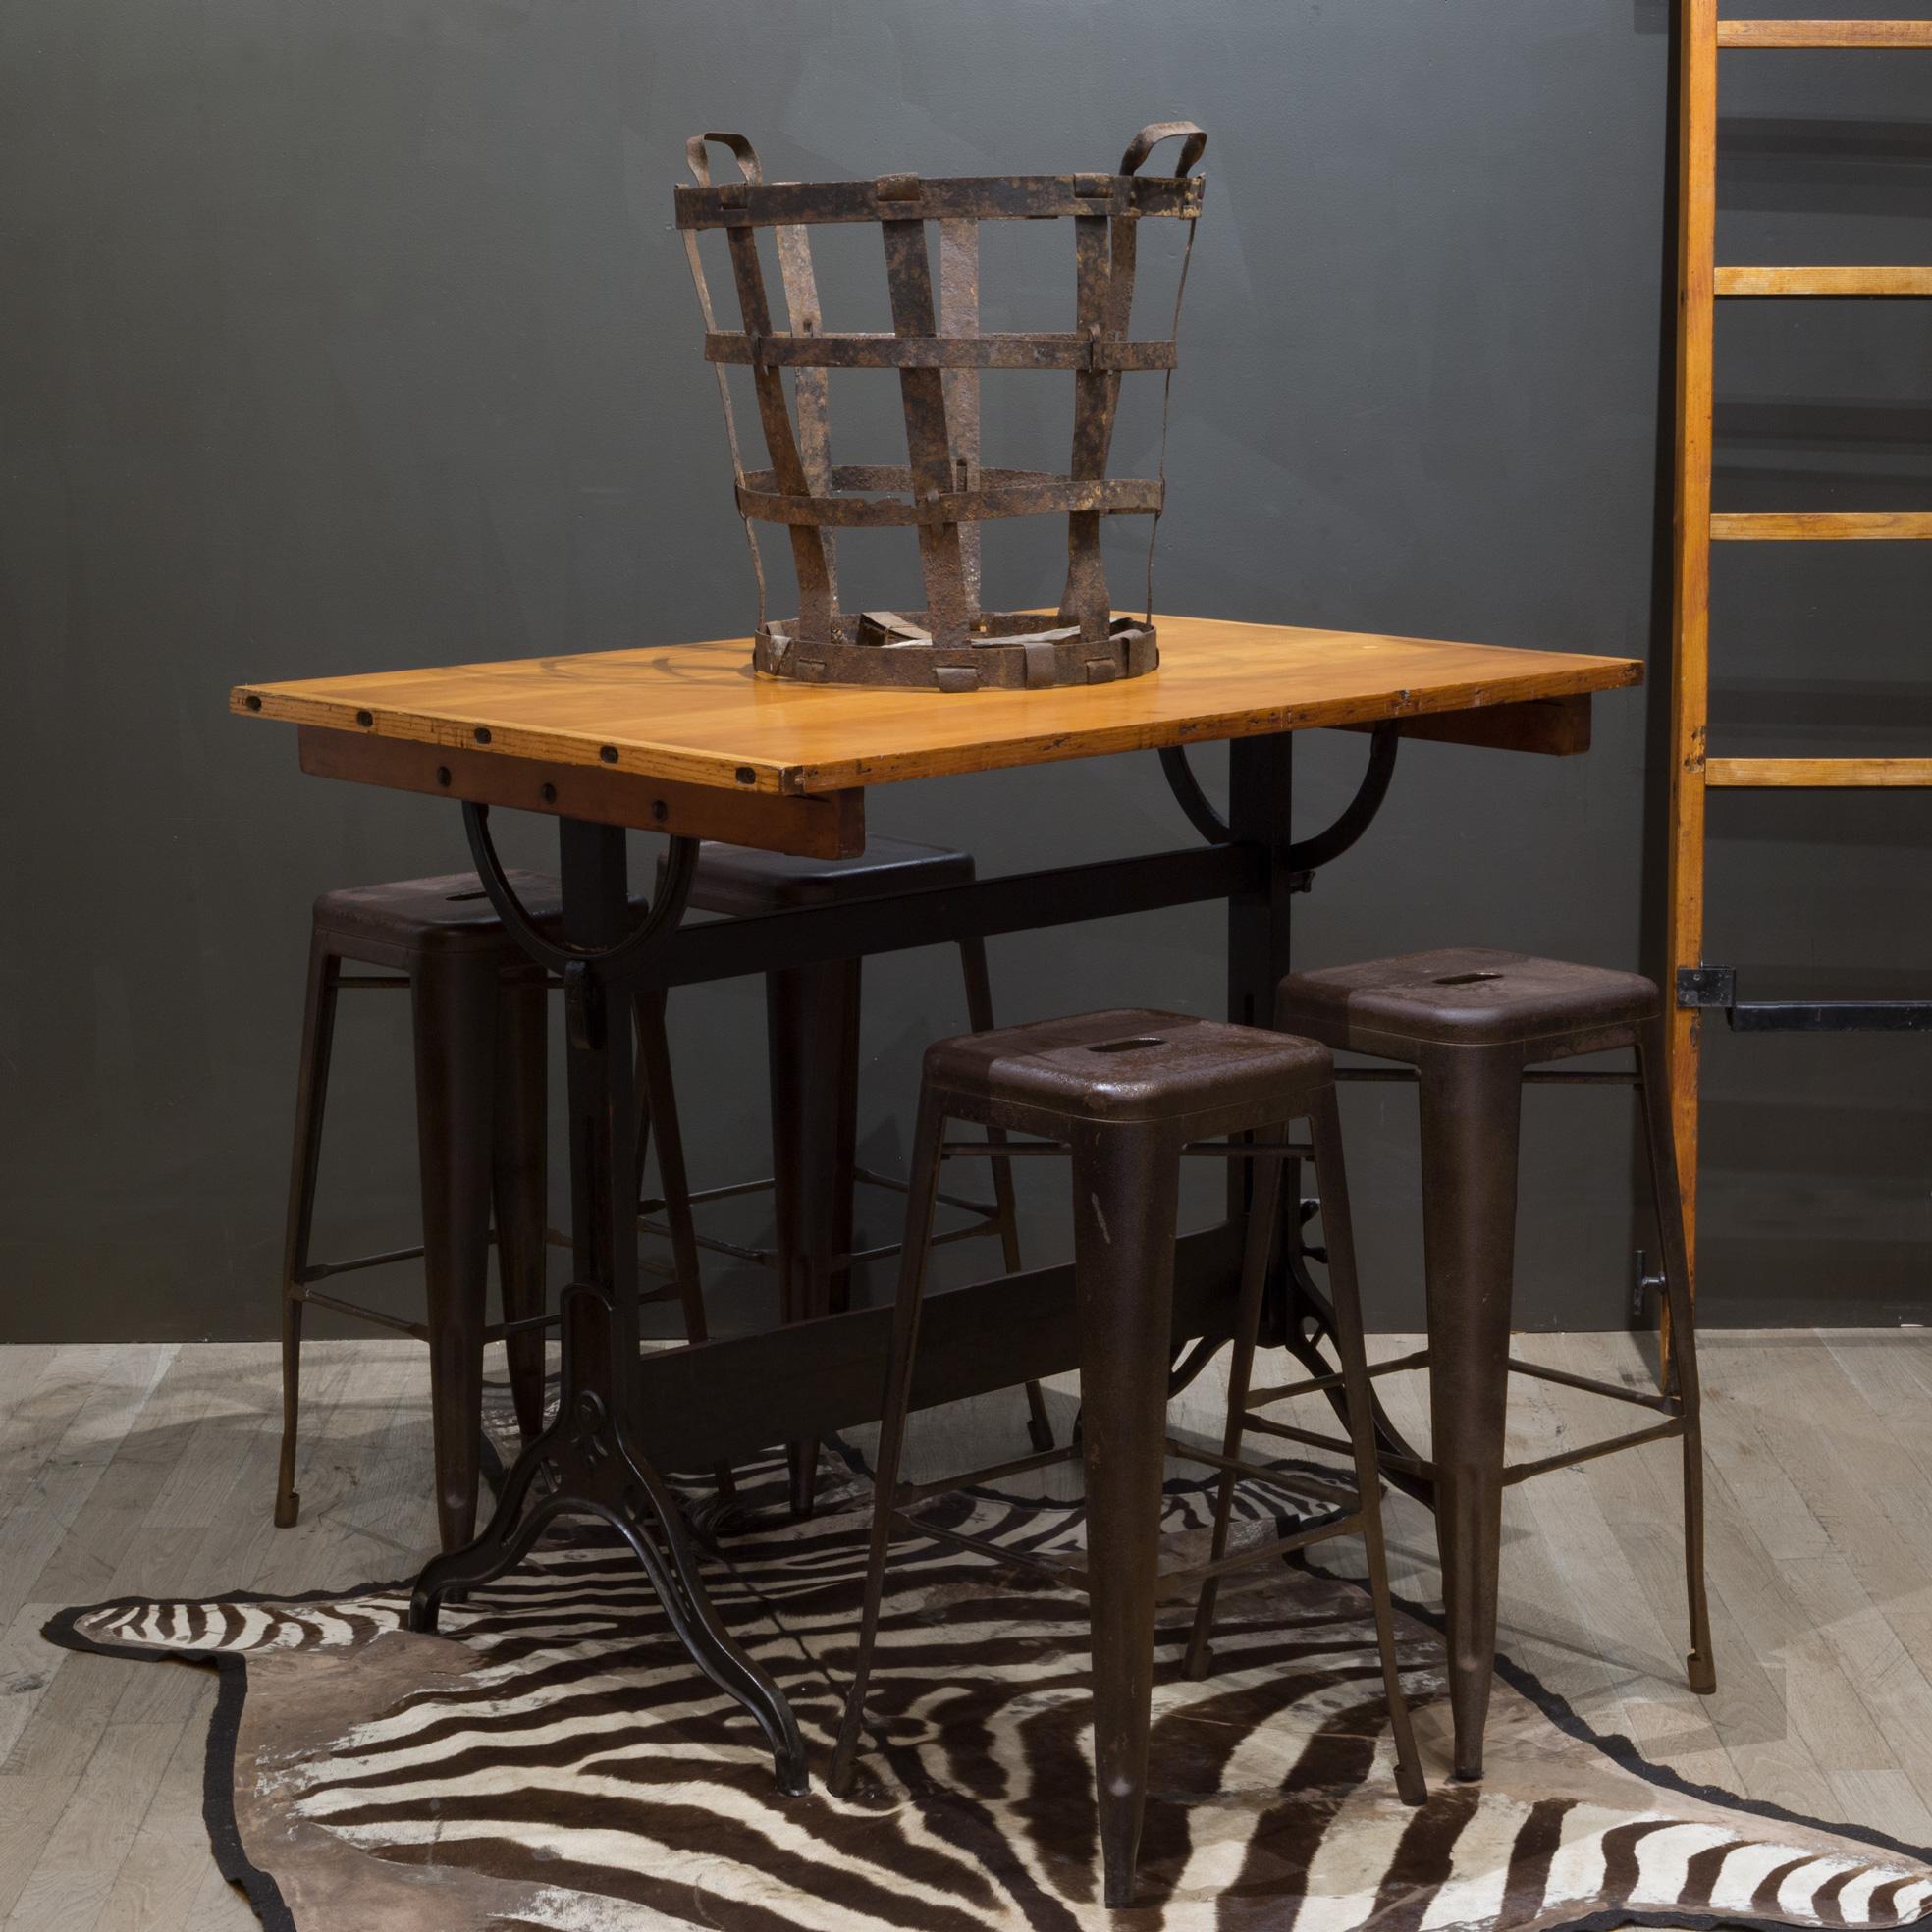 About

A fully adjustable industrial drafting table with solid wood top and cast iron base and knobs. The table can be used as a tall dining table, desk or drafting table. The top swivels at any angle and from either side. The whole table can be